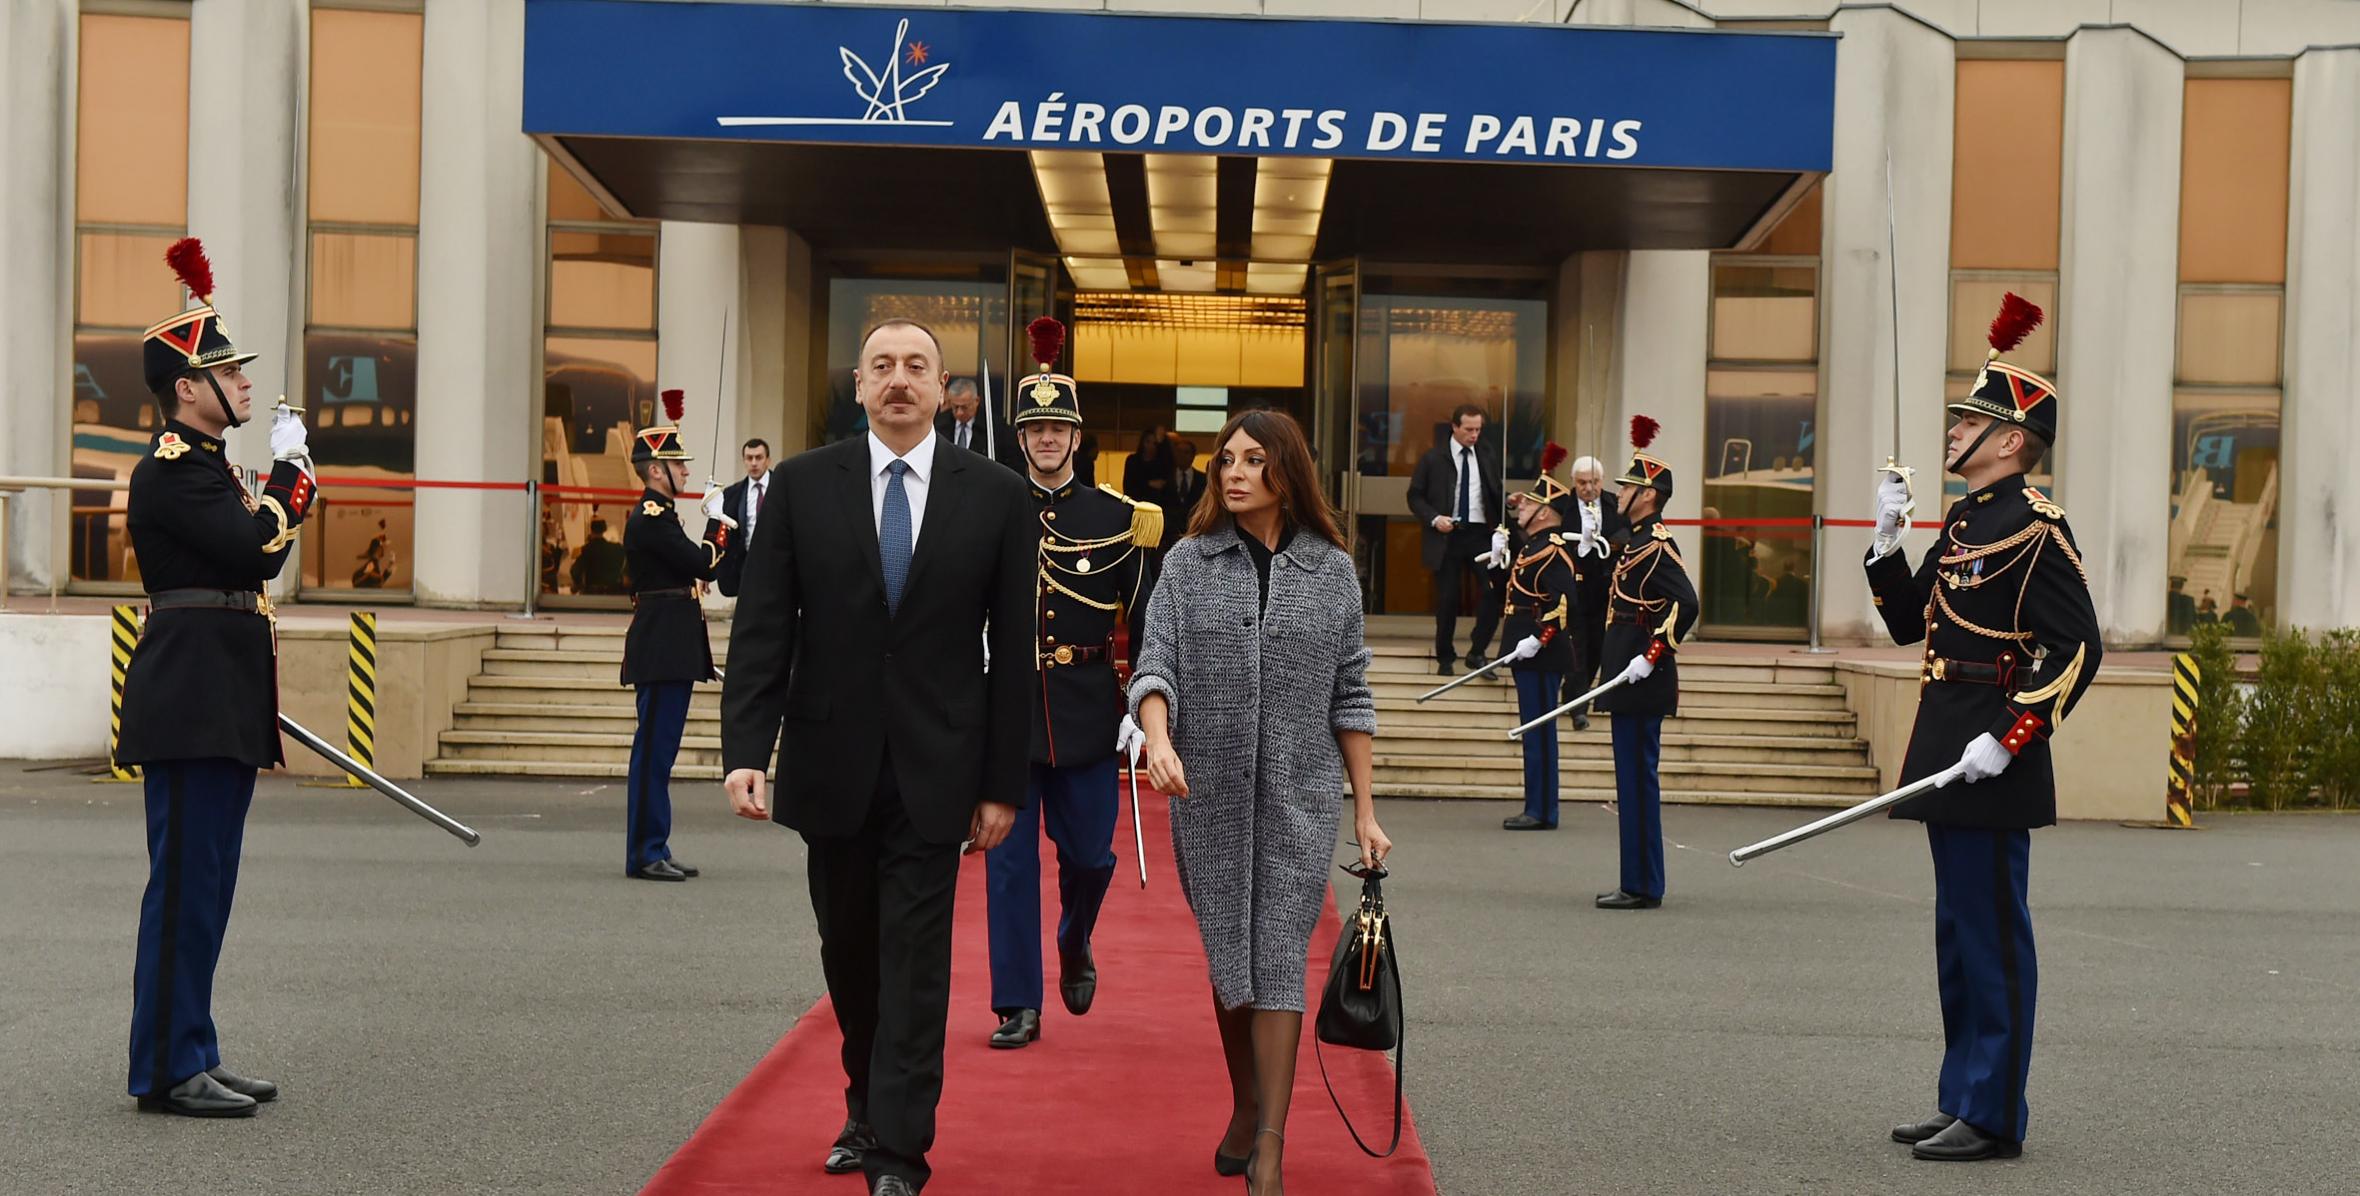 Ilham Aliyev’s working visit to France ended